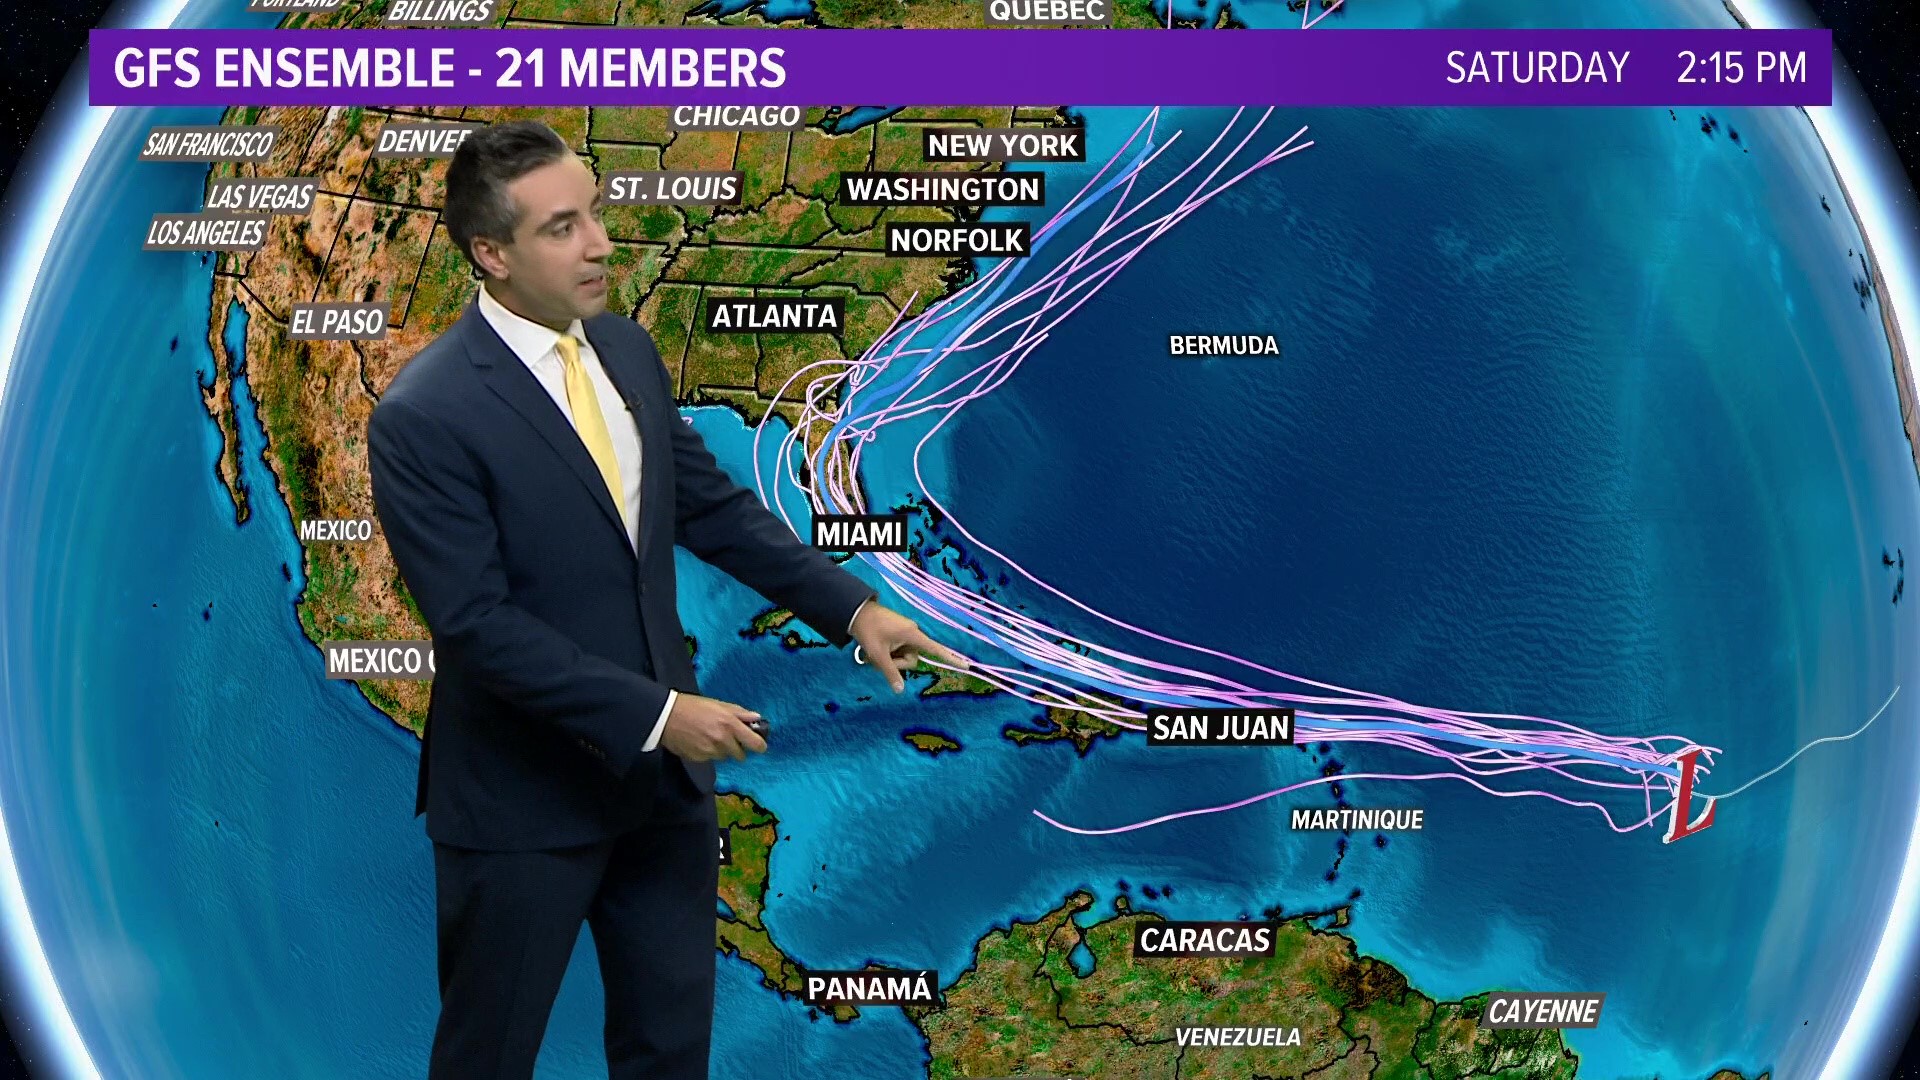 Meteorologist Tim Pandajis gives a tropics update for Wednesday, August 19, 2020, including Invest 97-L, Invest 98-L, and Hurricane Genevieve in the Pacific.